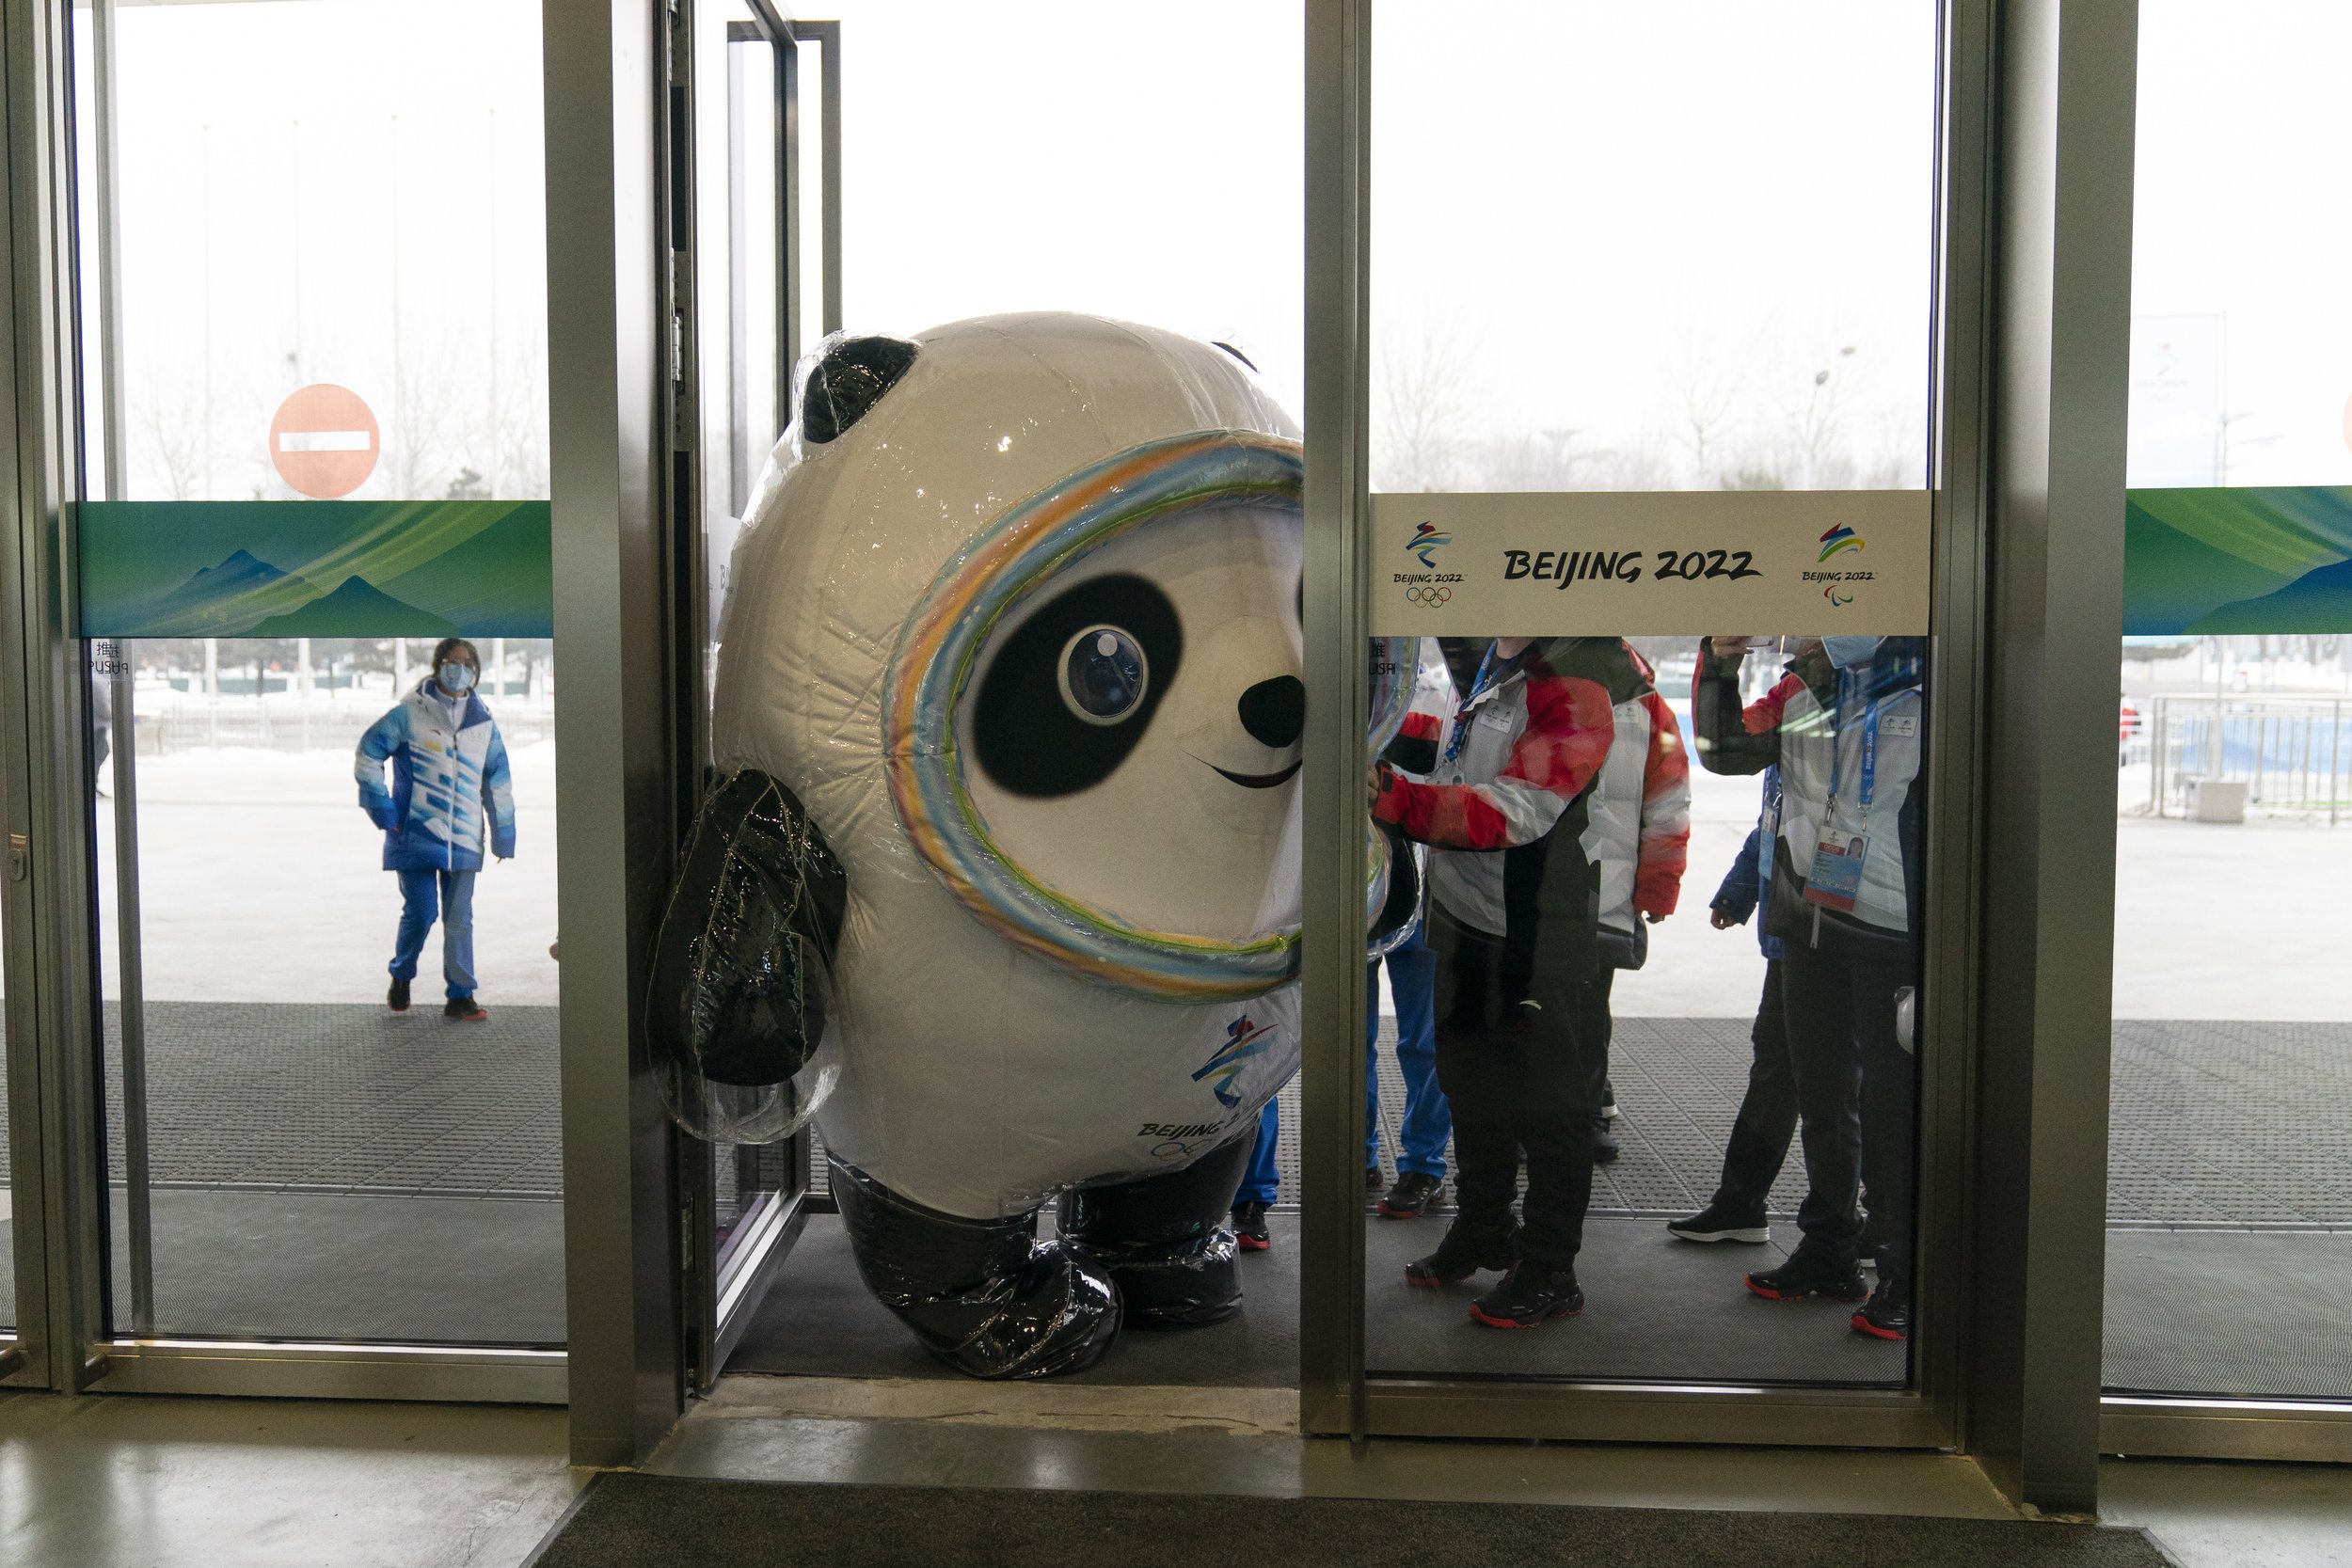  Olympic mascot, Bing Dwen Dwen, tries to squeeze through the door to enter the main media center at the 2022 Winter Olympics, Jan. 24, 2022, in Beijing. Athletes and others headed to the Olympics face a multitude of COVID-19 testing hurdles as organ